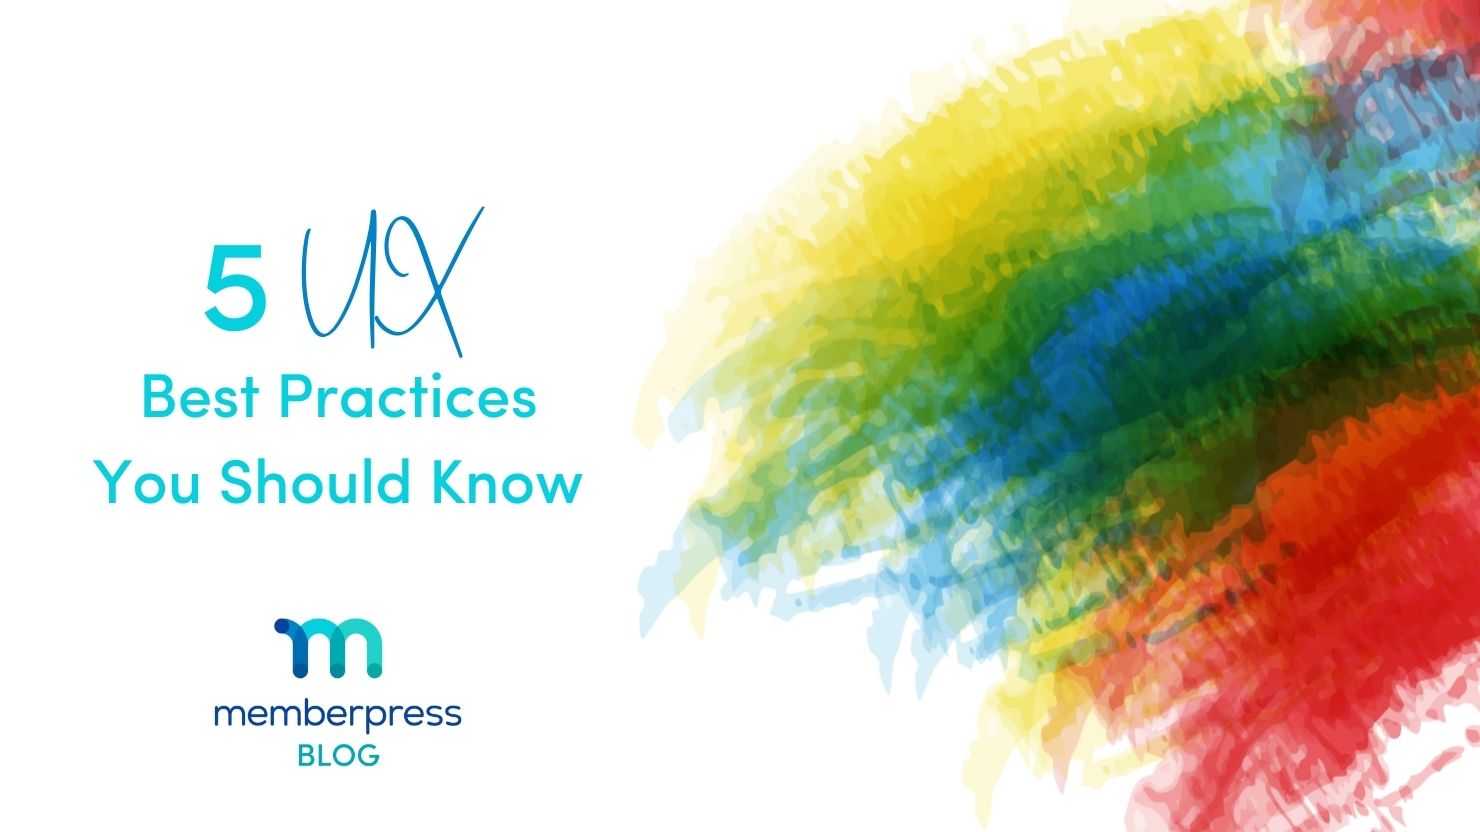 UX best practices you should know